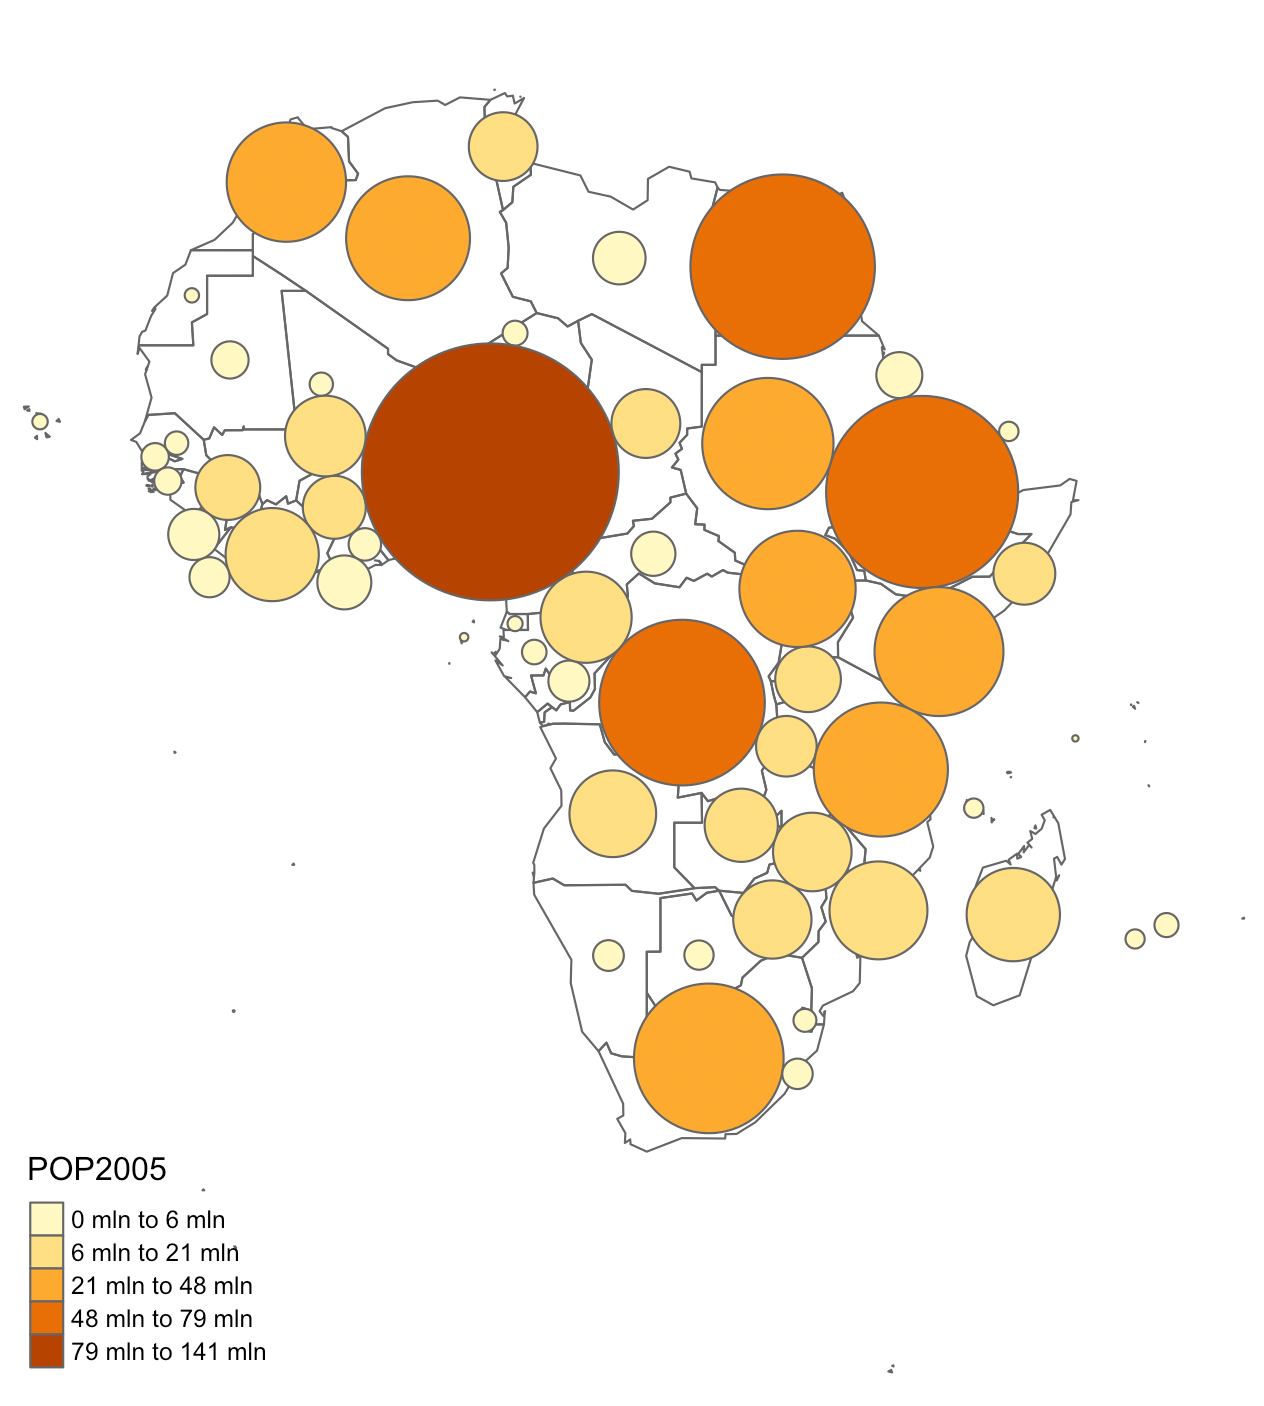 A Dorling cartogram of African countries and their populations